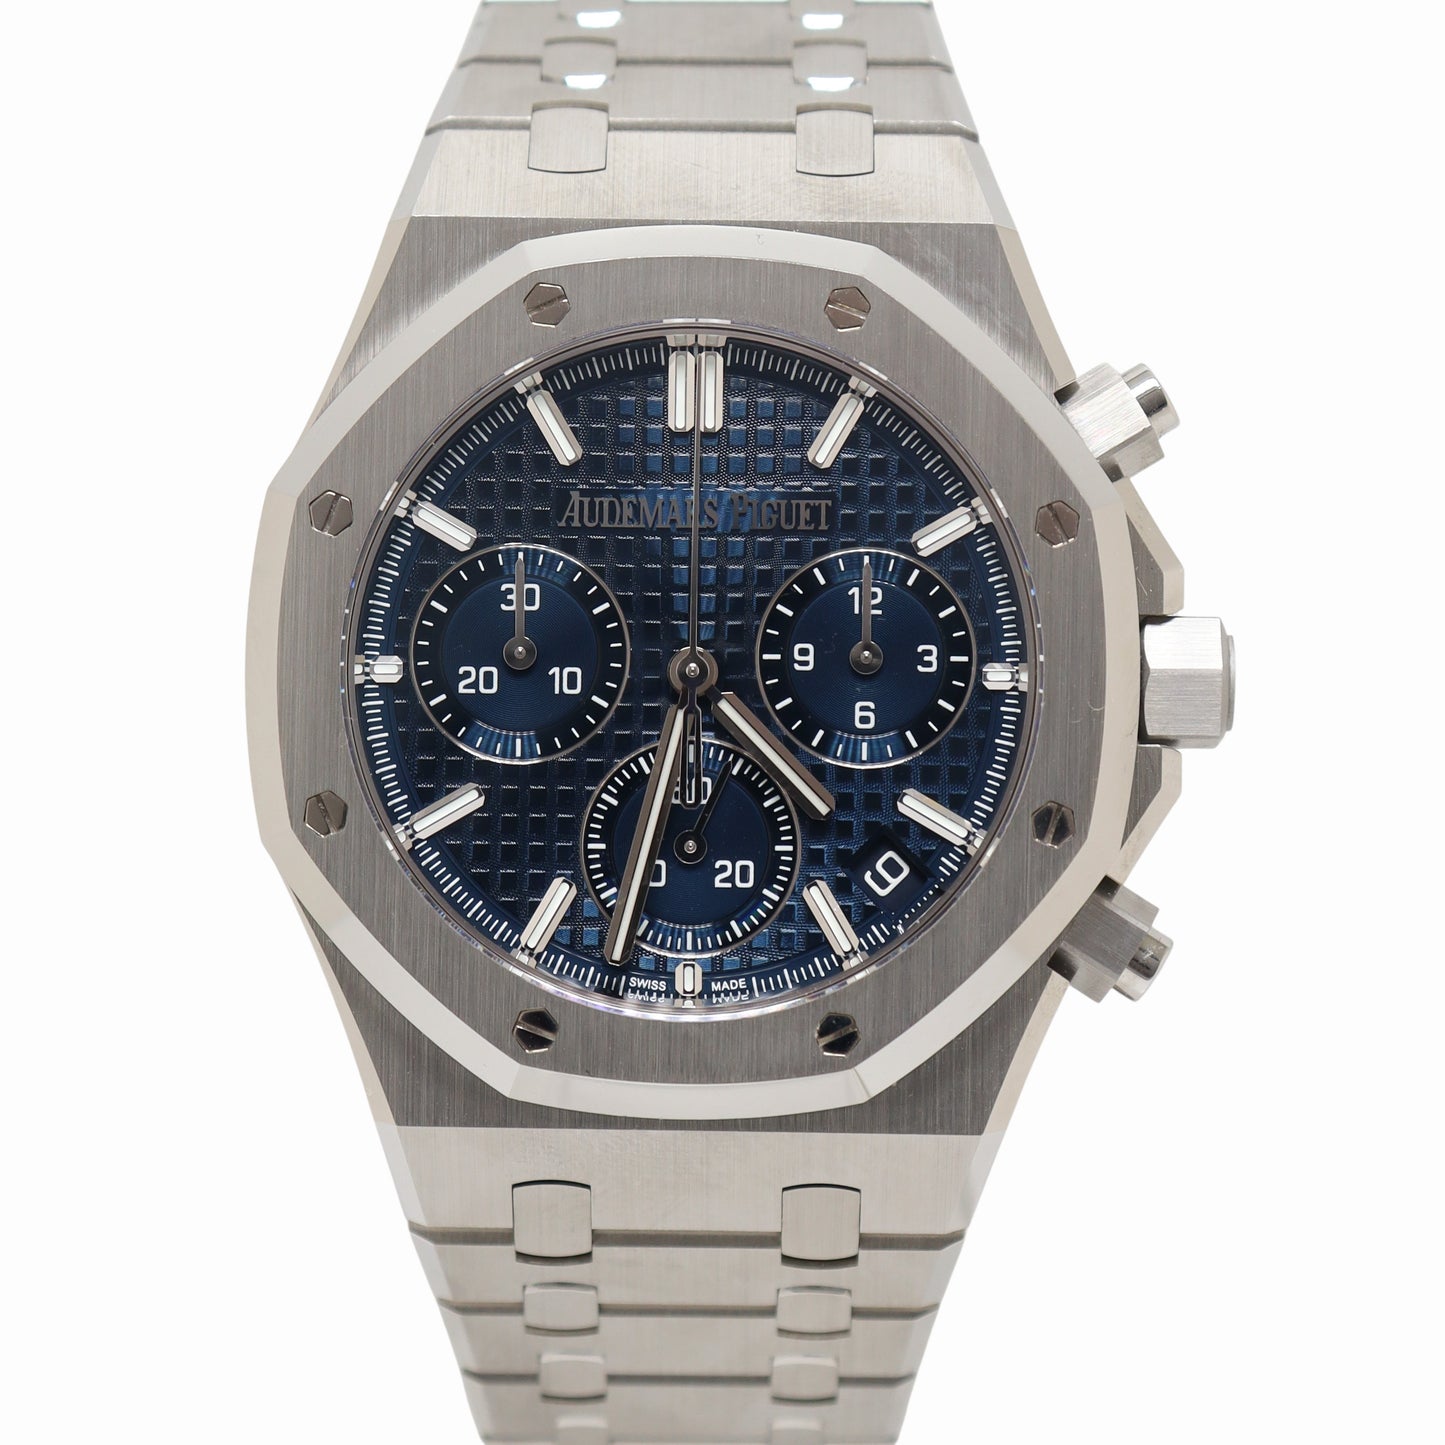 Audemars Piguet Royal Oak 50th Anniversary Stainless Steel 41mm Blue Chronograph "Grande Tapisserie" Dial Watch Reference# 26240ST.OO.1320ST.01 - Happy Jewelers Fine Jewelry Lifetime Warranty